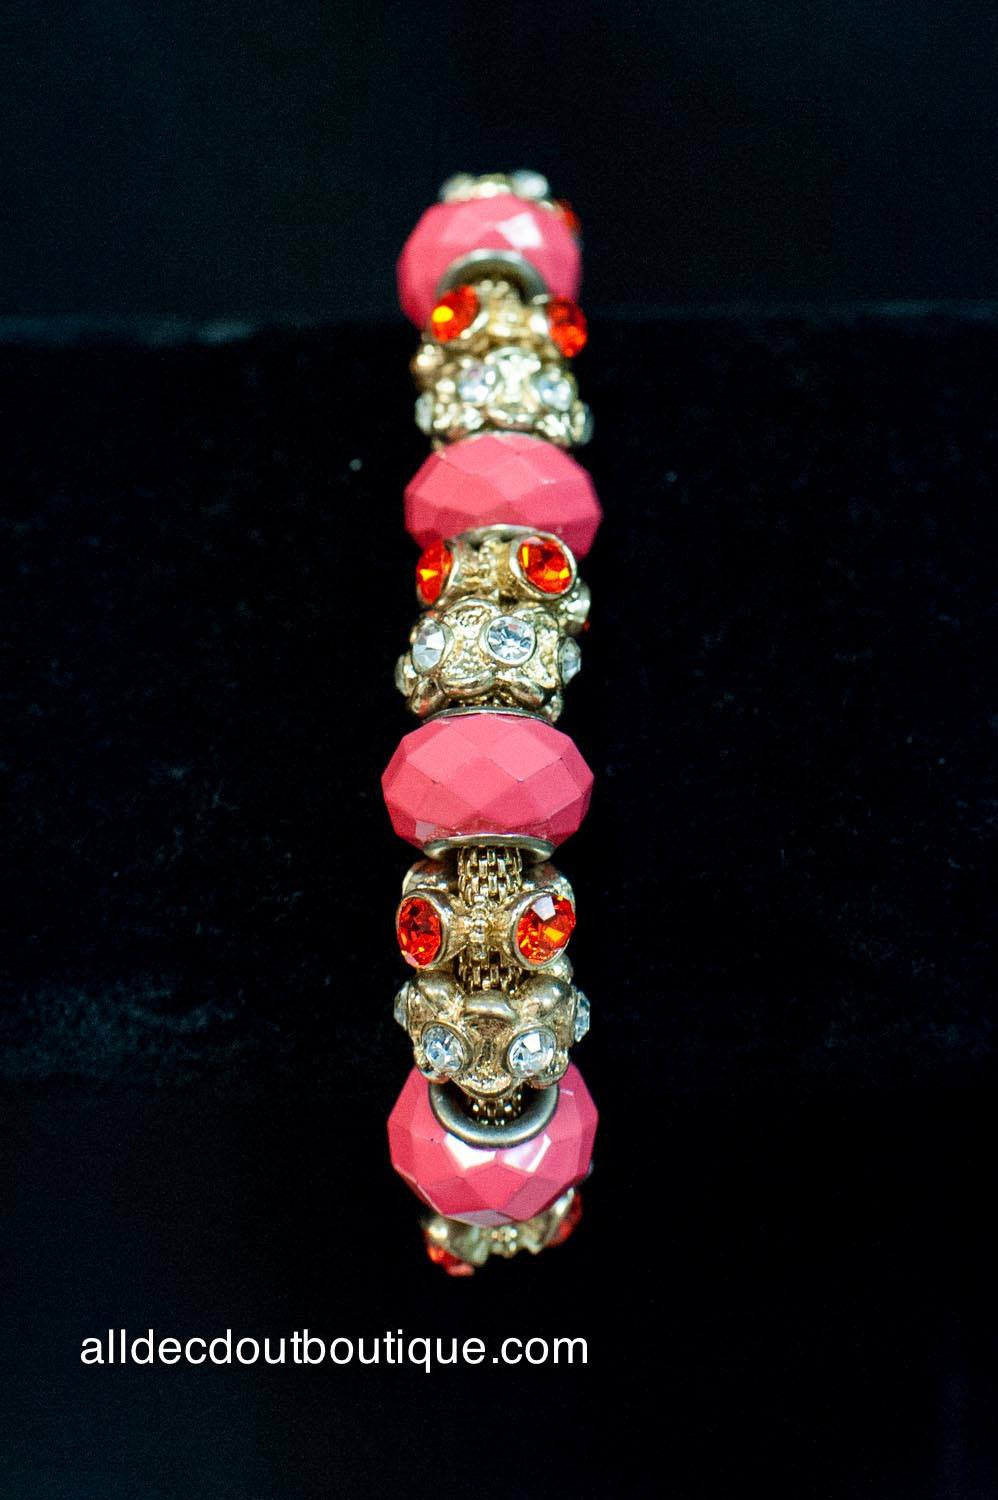 ADO | Gold Stretch Bracelet with Hot Pink Beads - All Decd Out